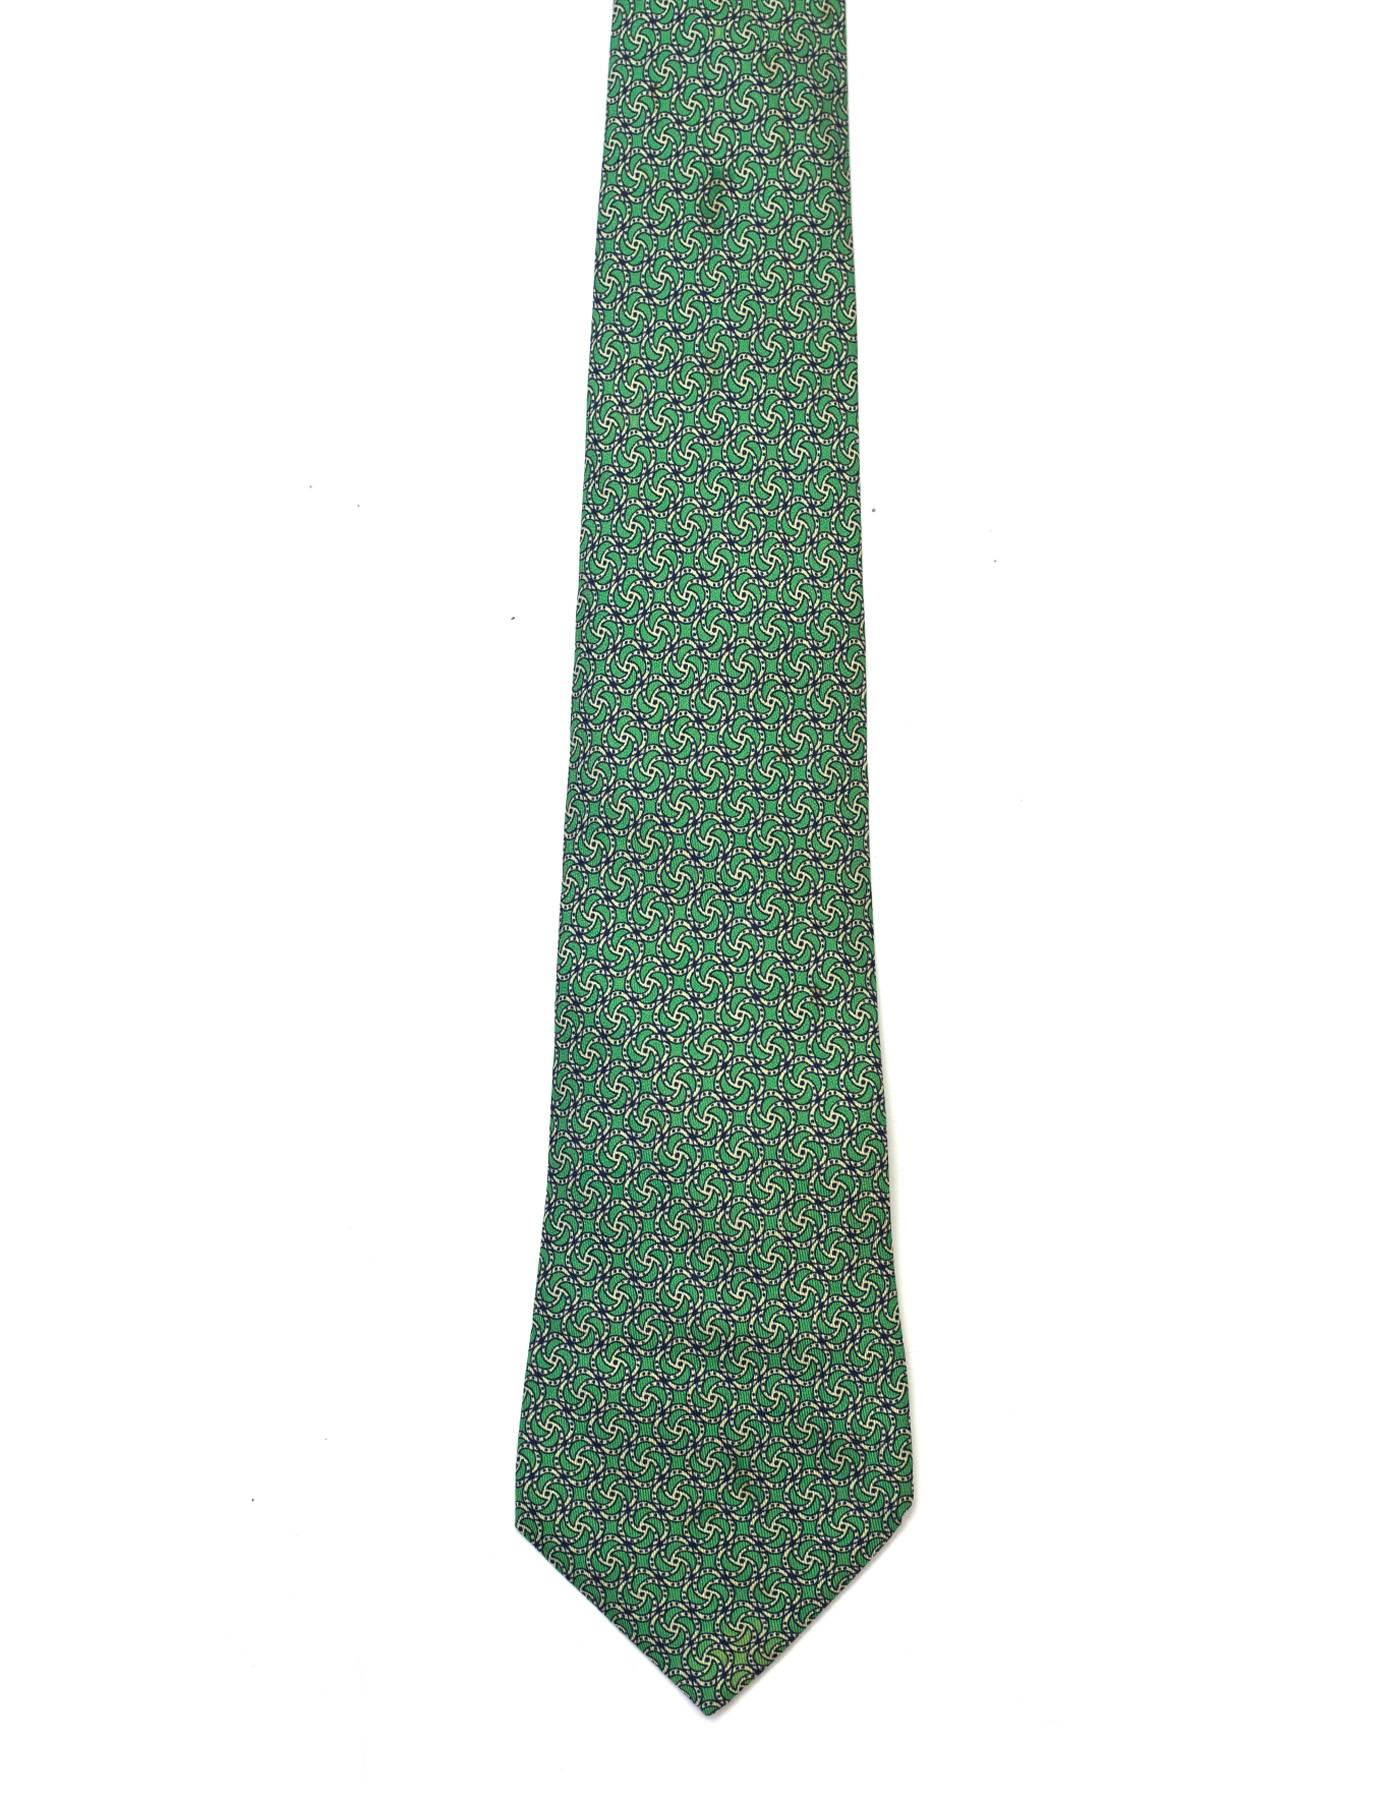 Hermes Green Printed Silk Tie

Made In: France
Color: Green and white
Composition: 100% silk
Overall Condition: Excellent pre-owned condition with the exception of a small light patch at tip of tie and a small soiling spot (ref image)
Measurements: